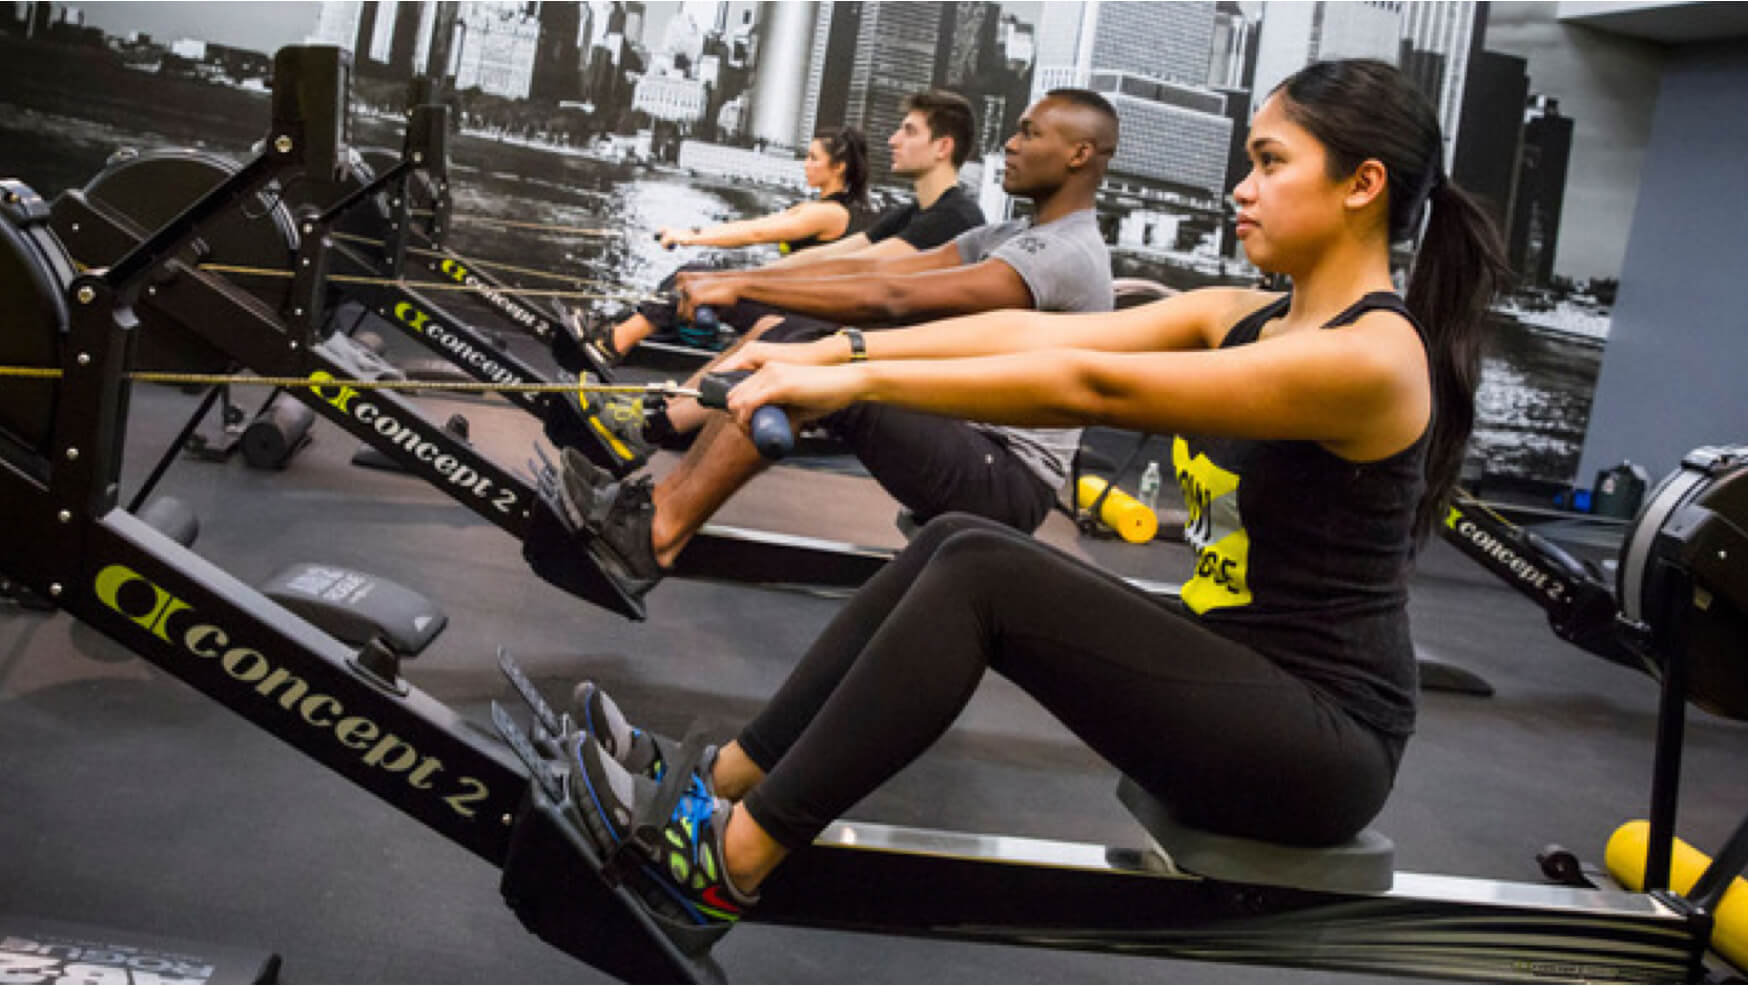 Four people using rowing machines